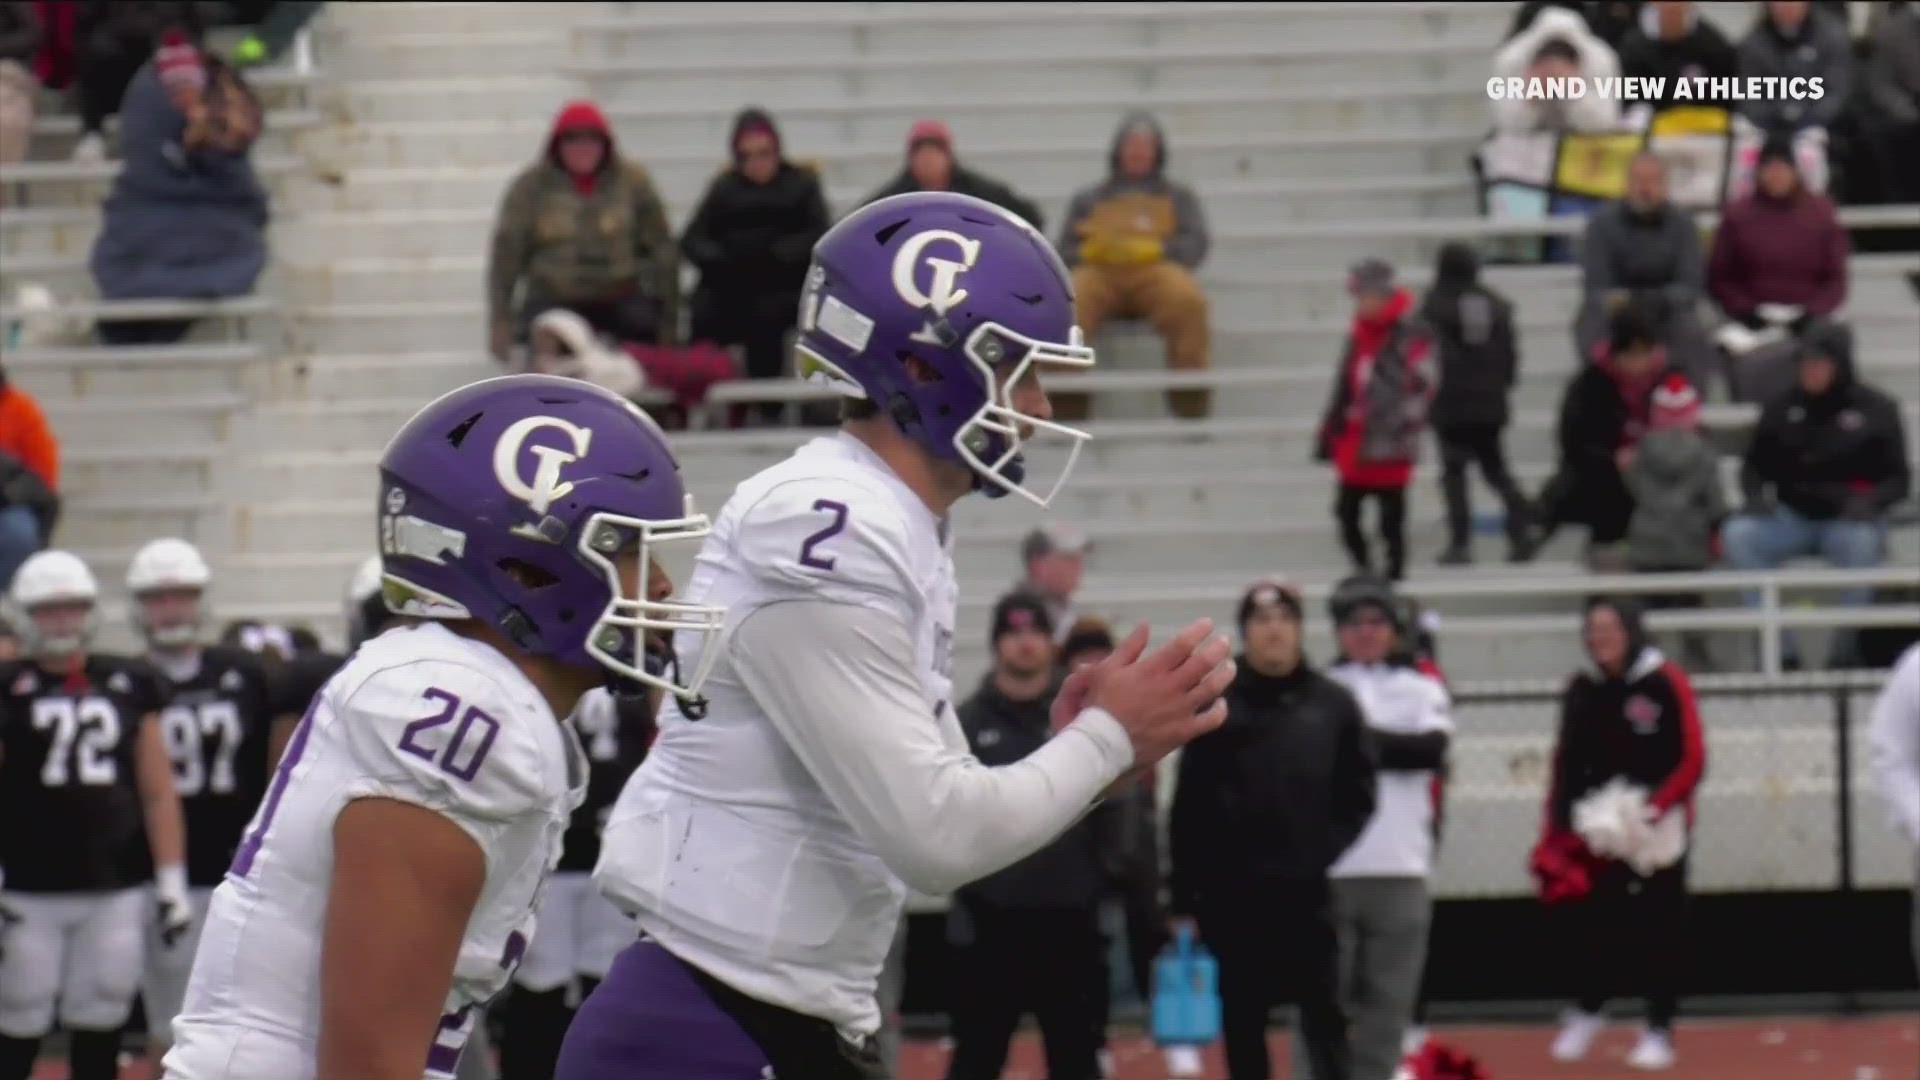 No. 10 College of Idaho is headed to the NAIA semifinals for the first time in program history after defeating No. 2 Grand View 31-17 on Saturday.